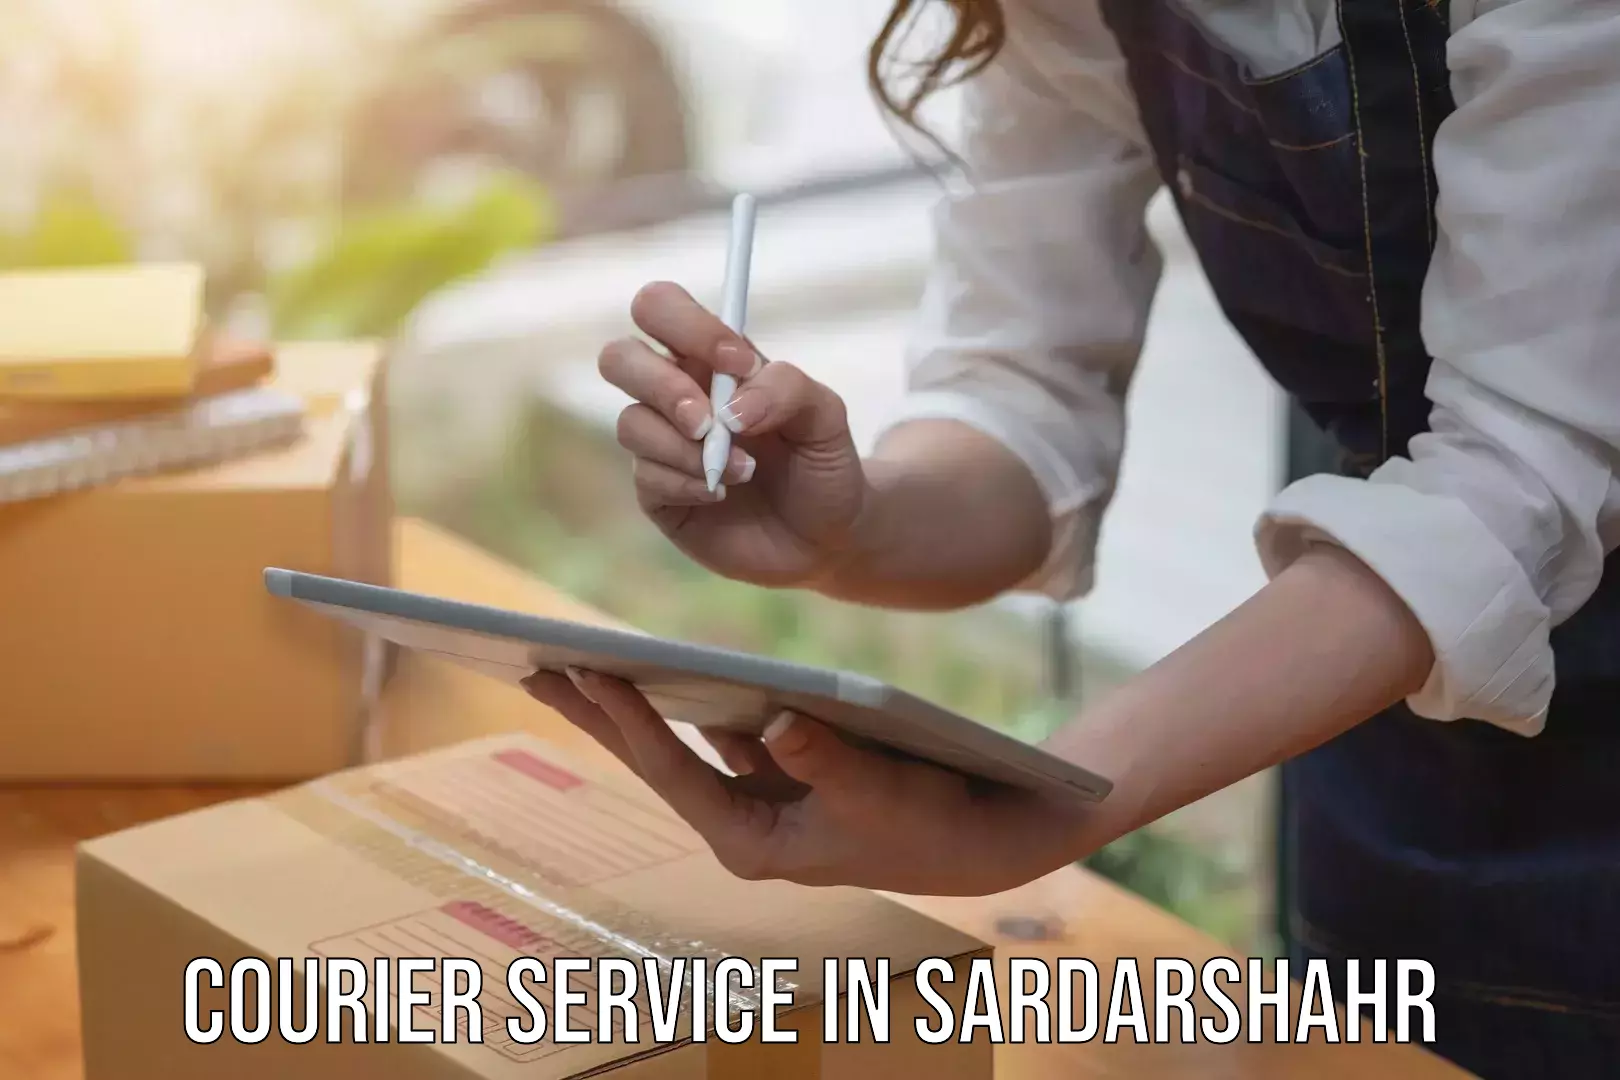 Parcel service for businesses in Sardarshahr